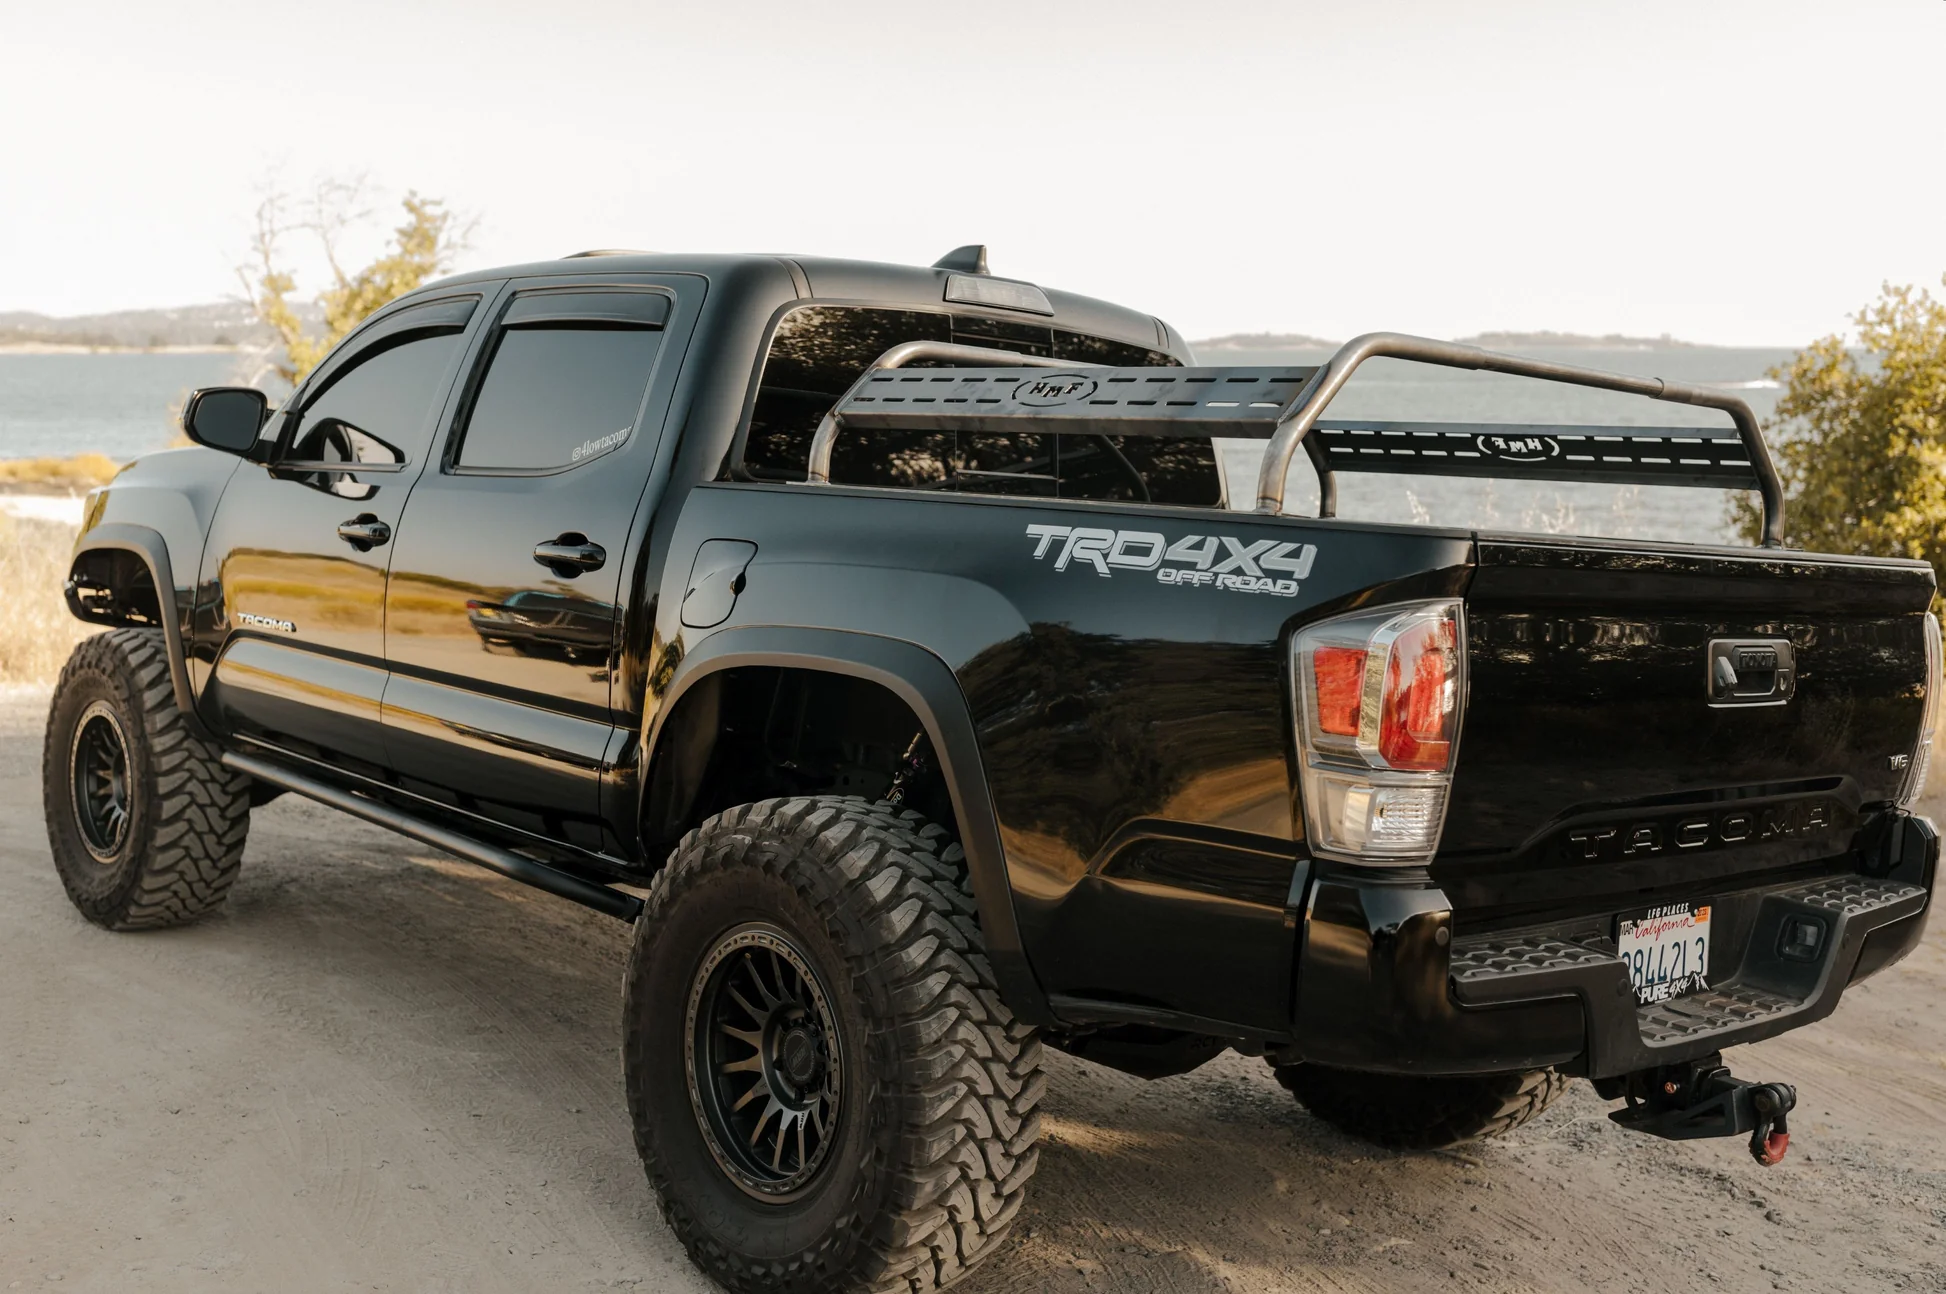 A black finish bed rack mounted on a Toyota Tacoma truck bed